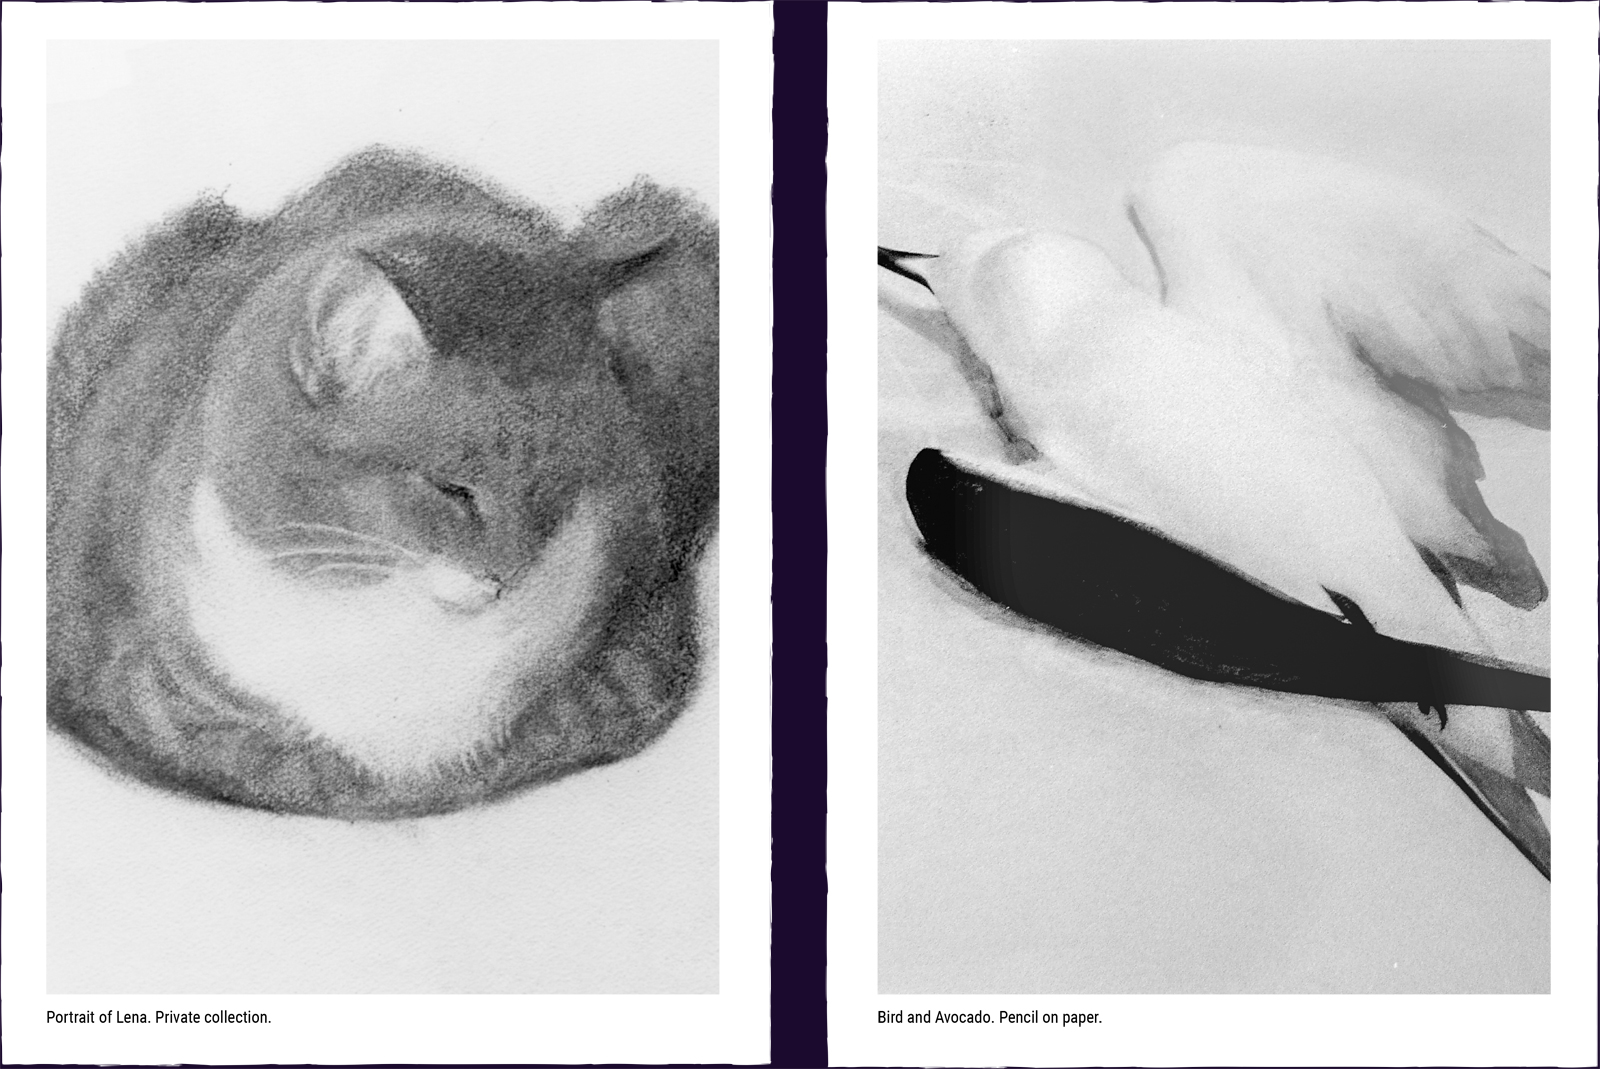 Two animal paintings. (1) Portrait of Lena. Private collection. (2) Bird and Avocado. Pencil on paper.